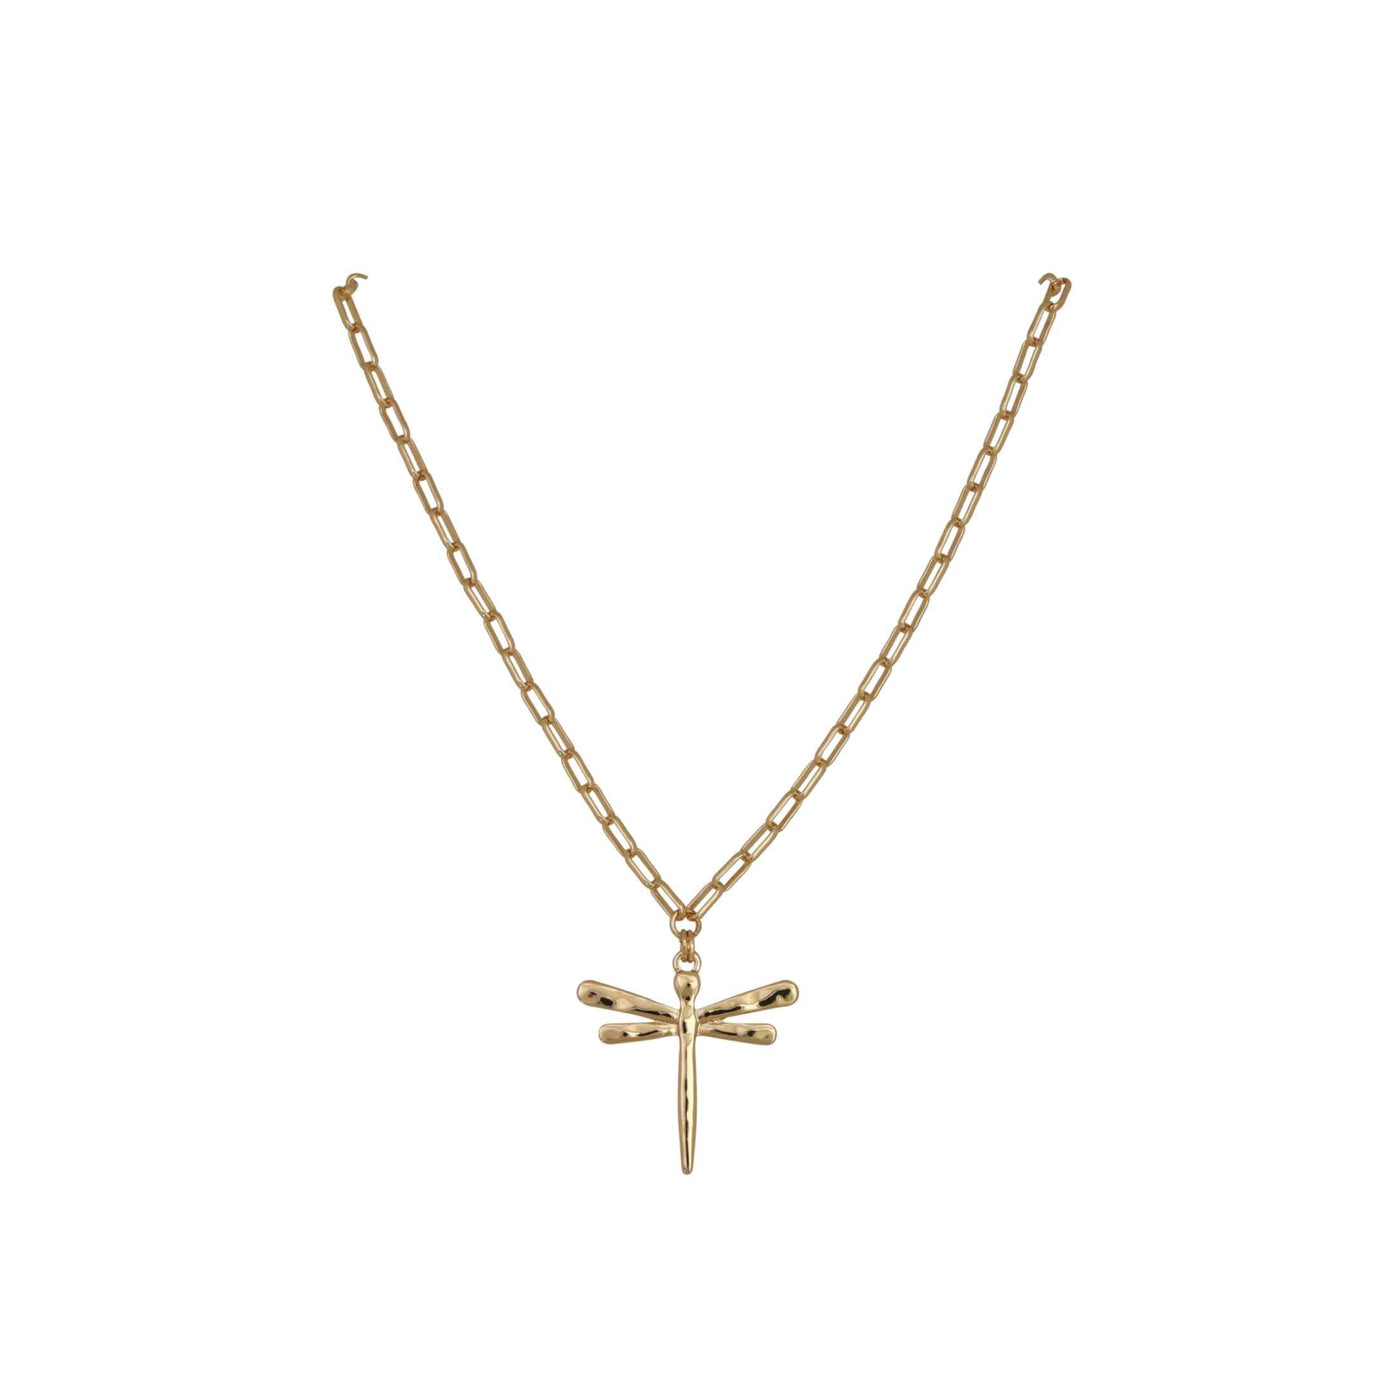 Merx - Fashion Chain Necklace with Dragonfly Pendant in Gold